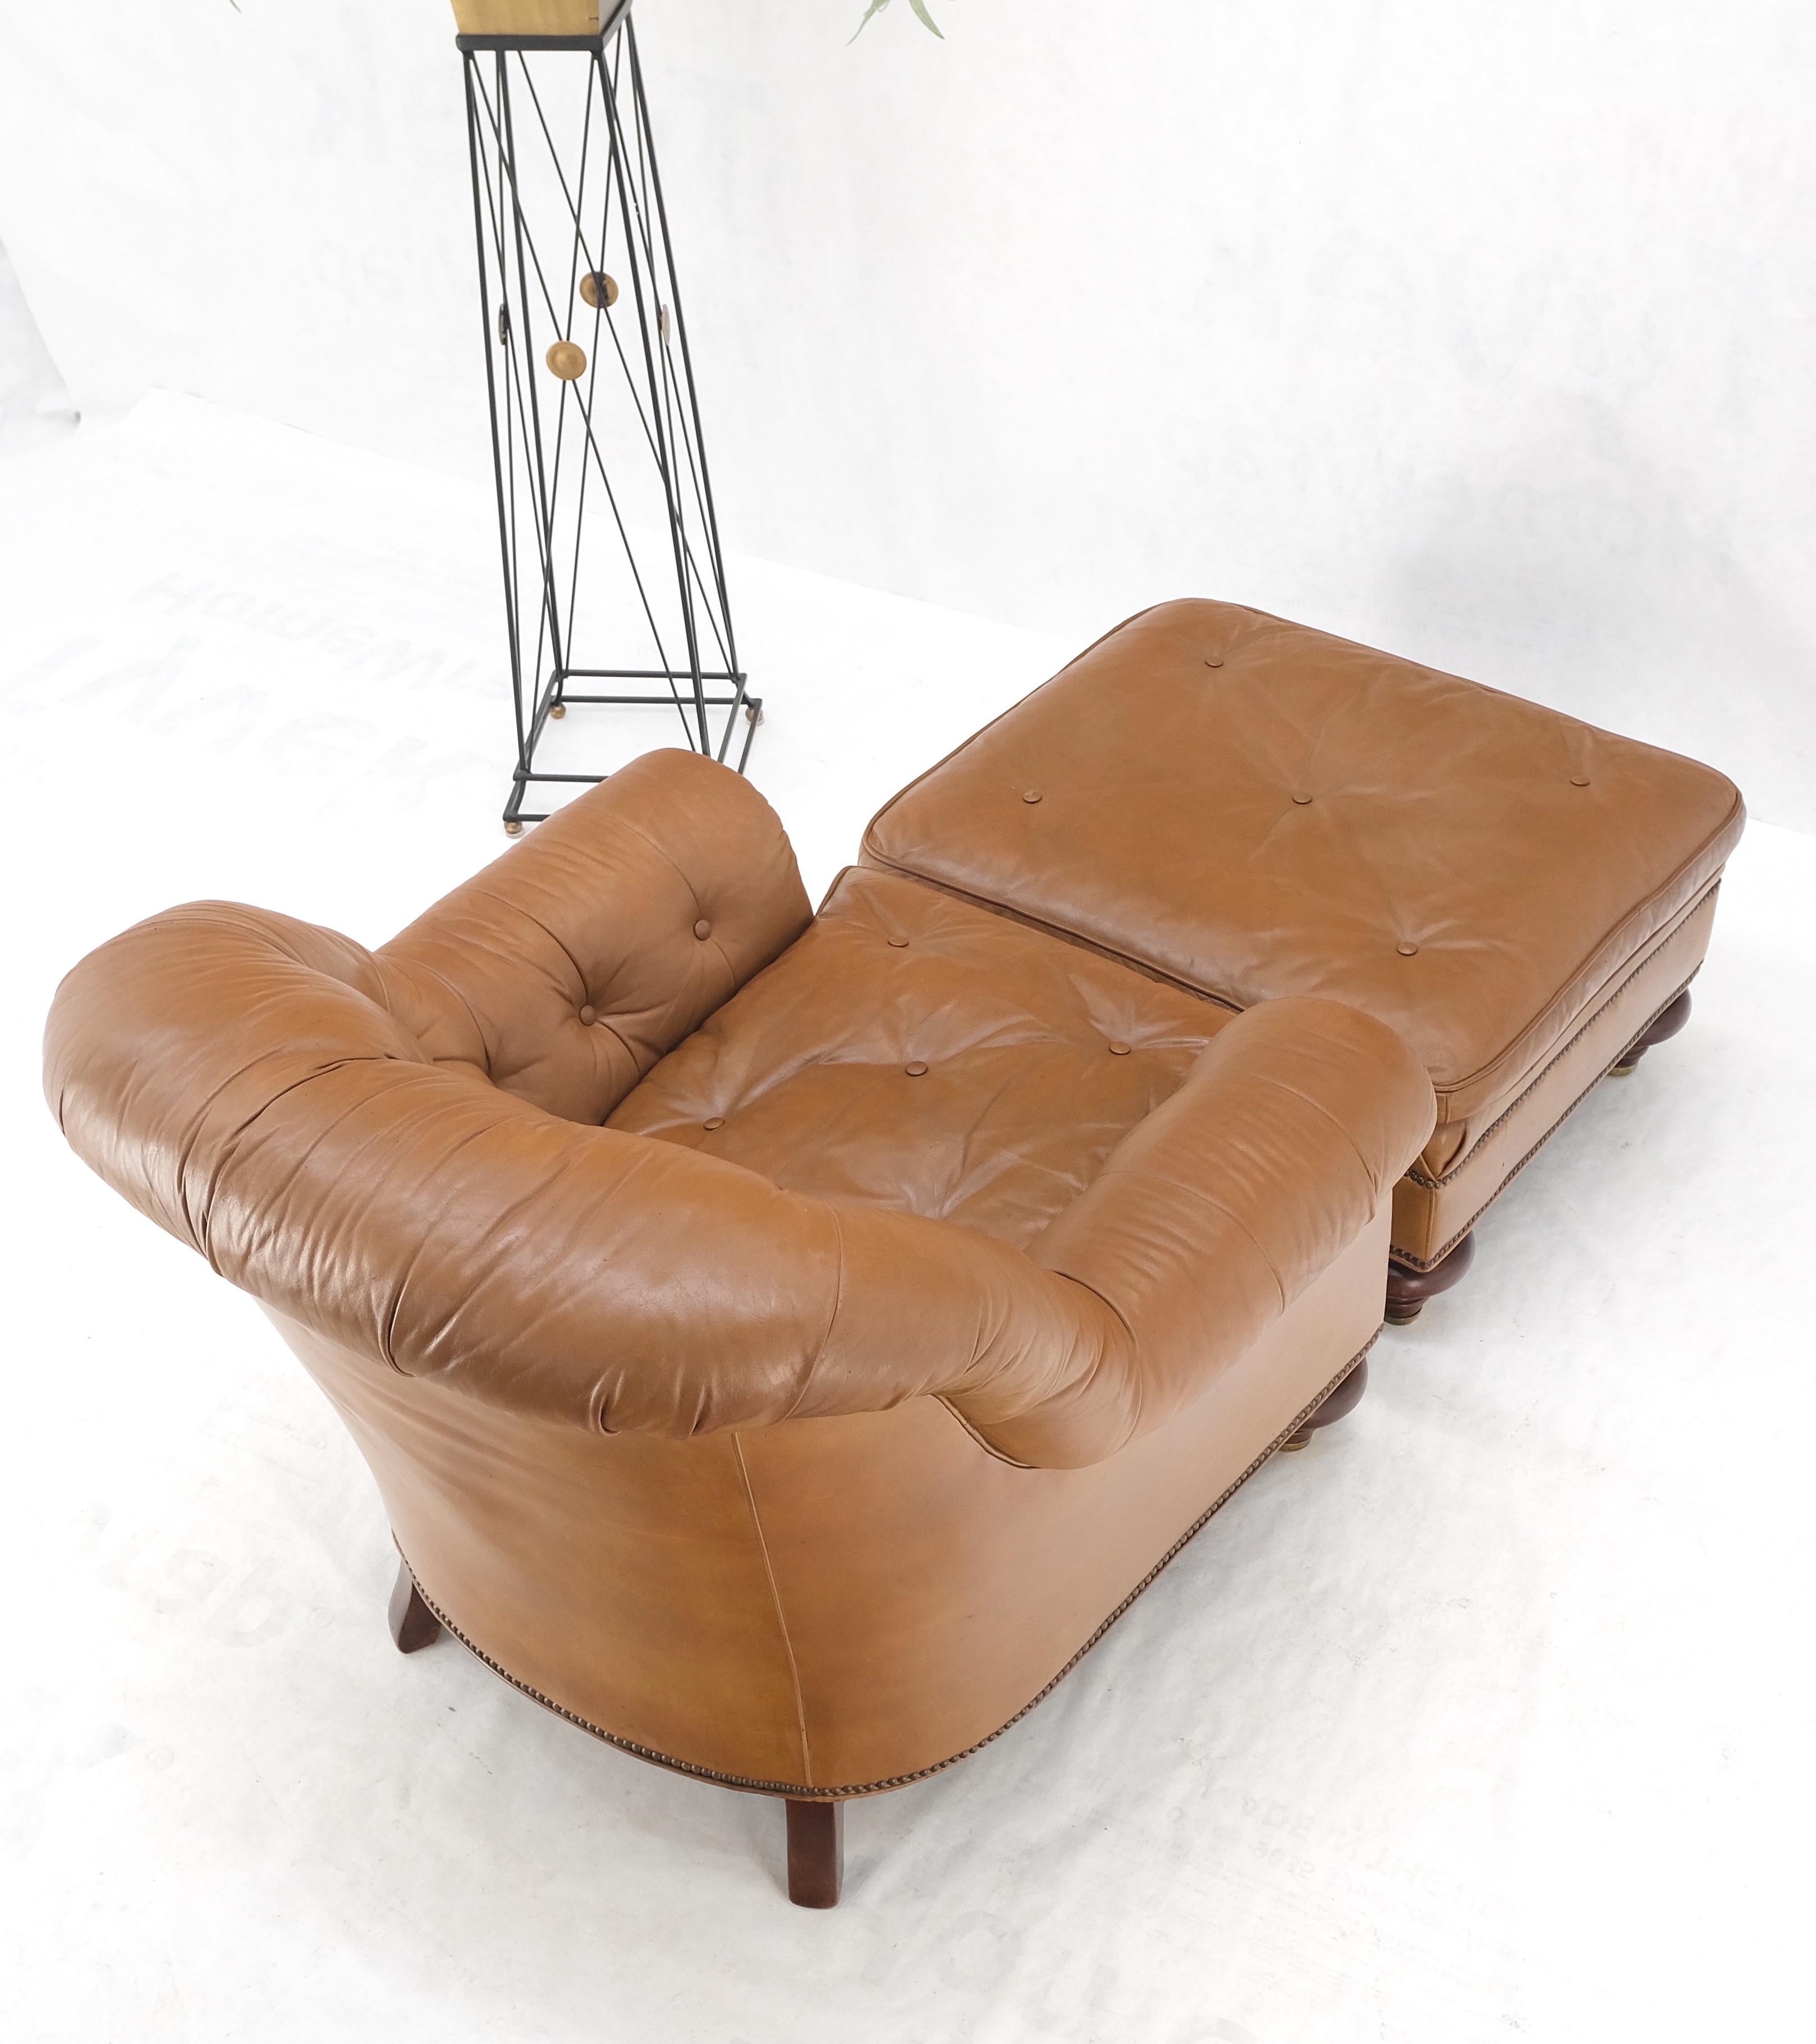 Baker Tan Leather Tufted Back Large Arm Chair w/ Ottoman Pouf Turned Legs MINT! For Sale 3